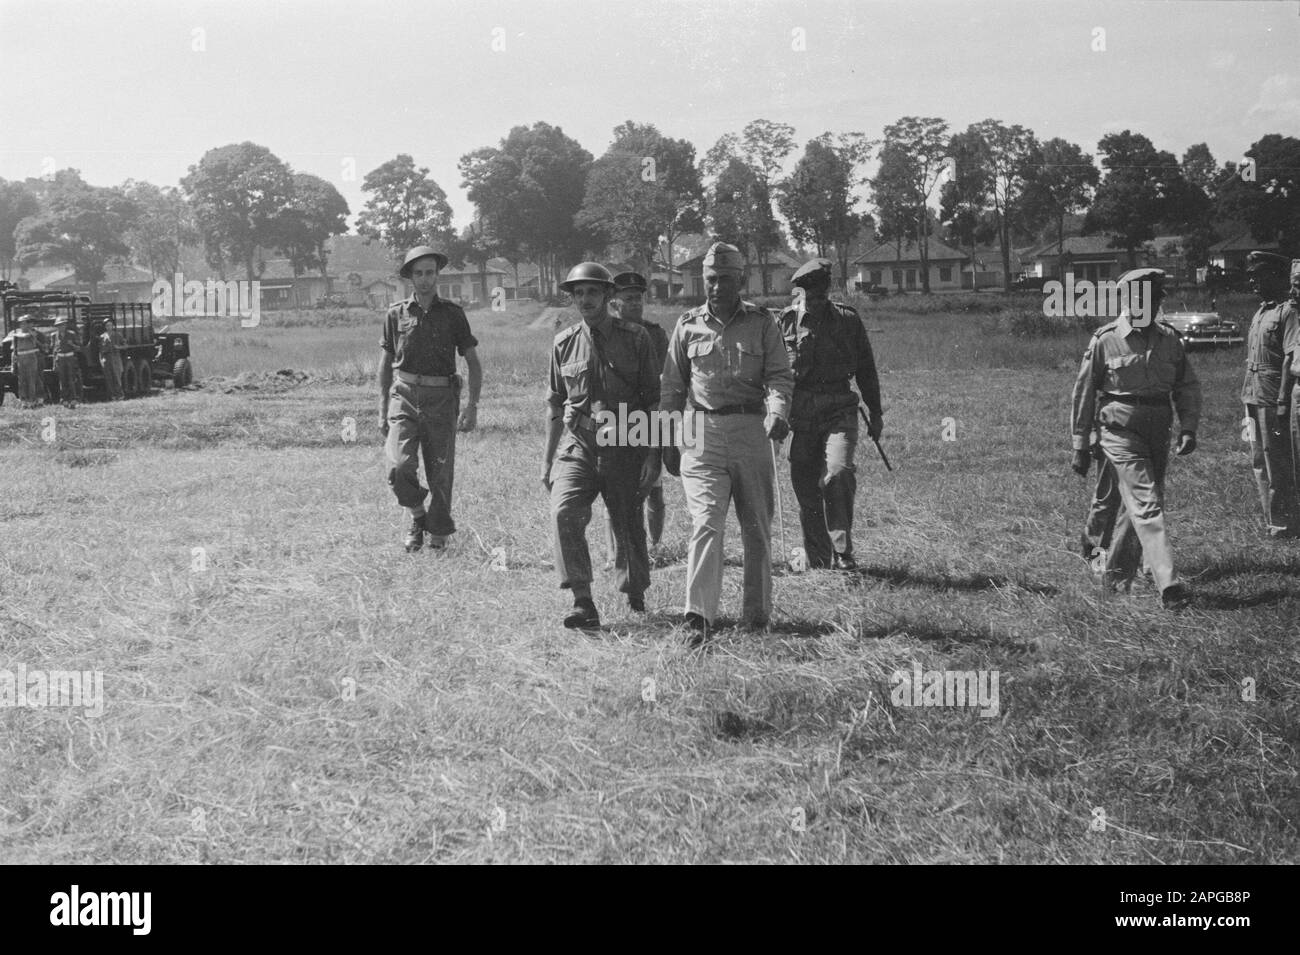 Inspection by General S. de Waal (commander B-division) Description: Collection Photo Collection Service for Army Contacts Indonesia, photon number 199-2-1 Date: April 1947 Location: Indonesia, Dutch East Indies Stock Photo